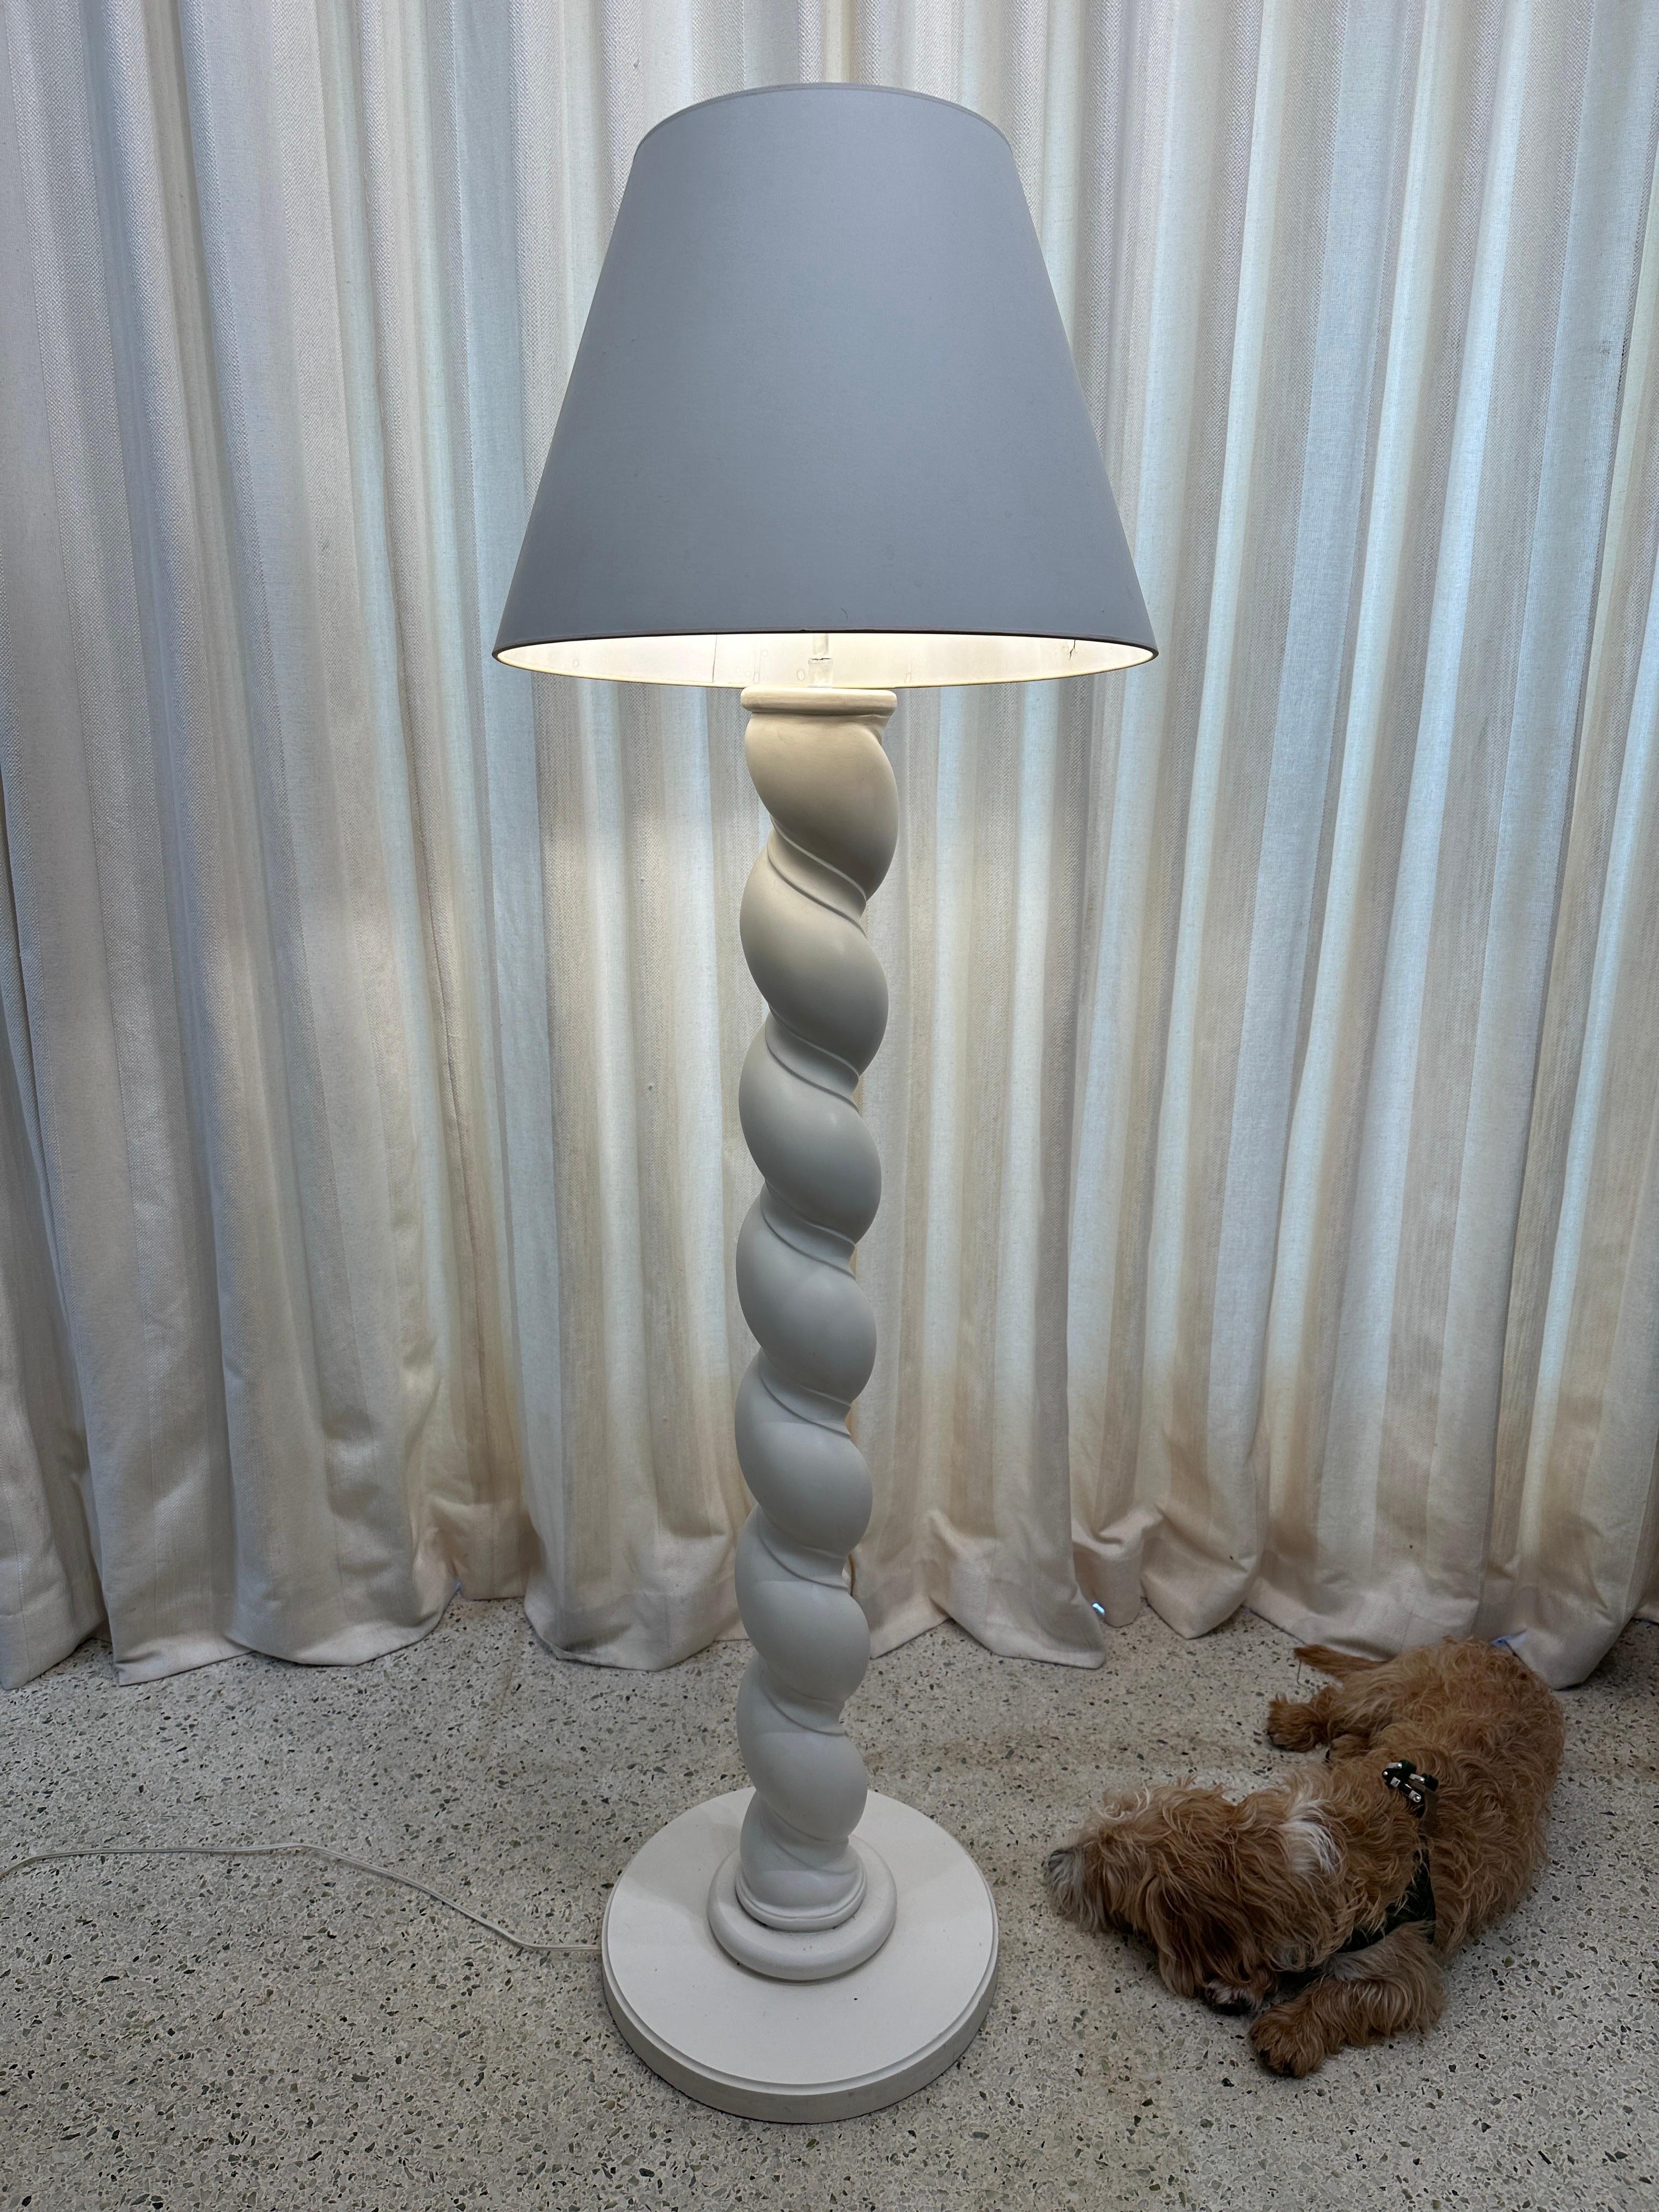 Extremely Rare Composition Plaster Floor Lamp w/ Spiraling Design by Sirmos For Sale 2